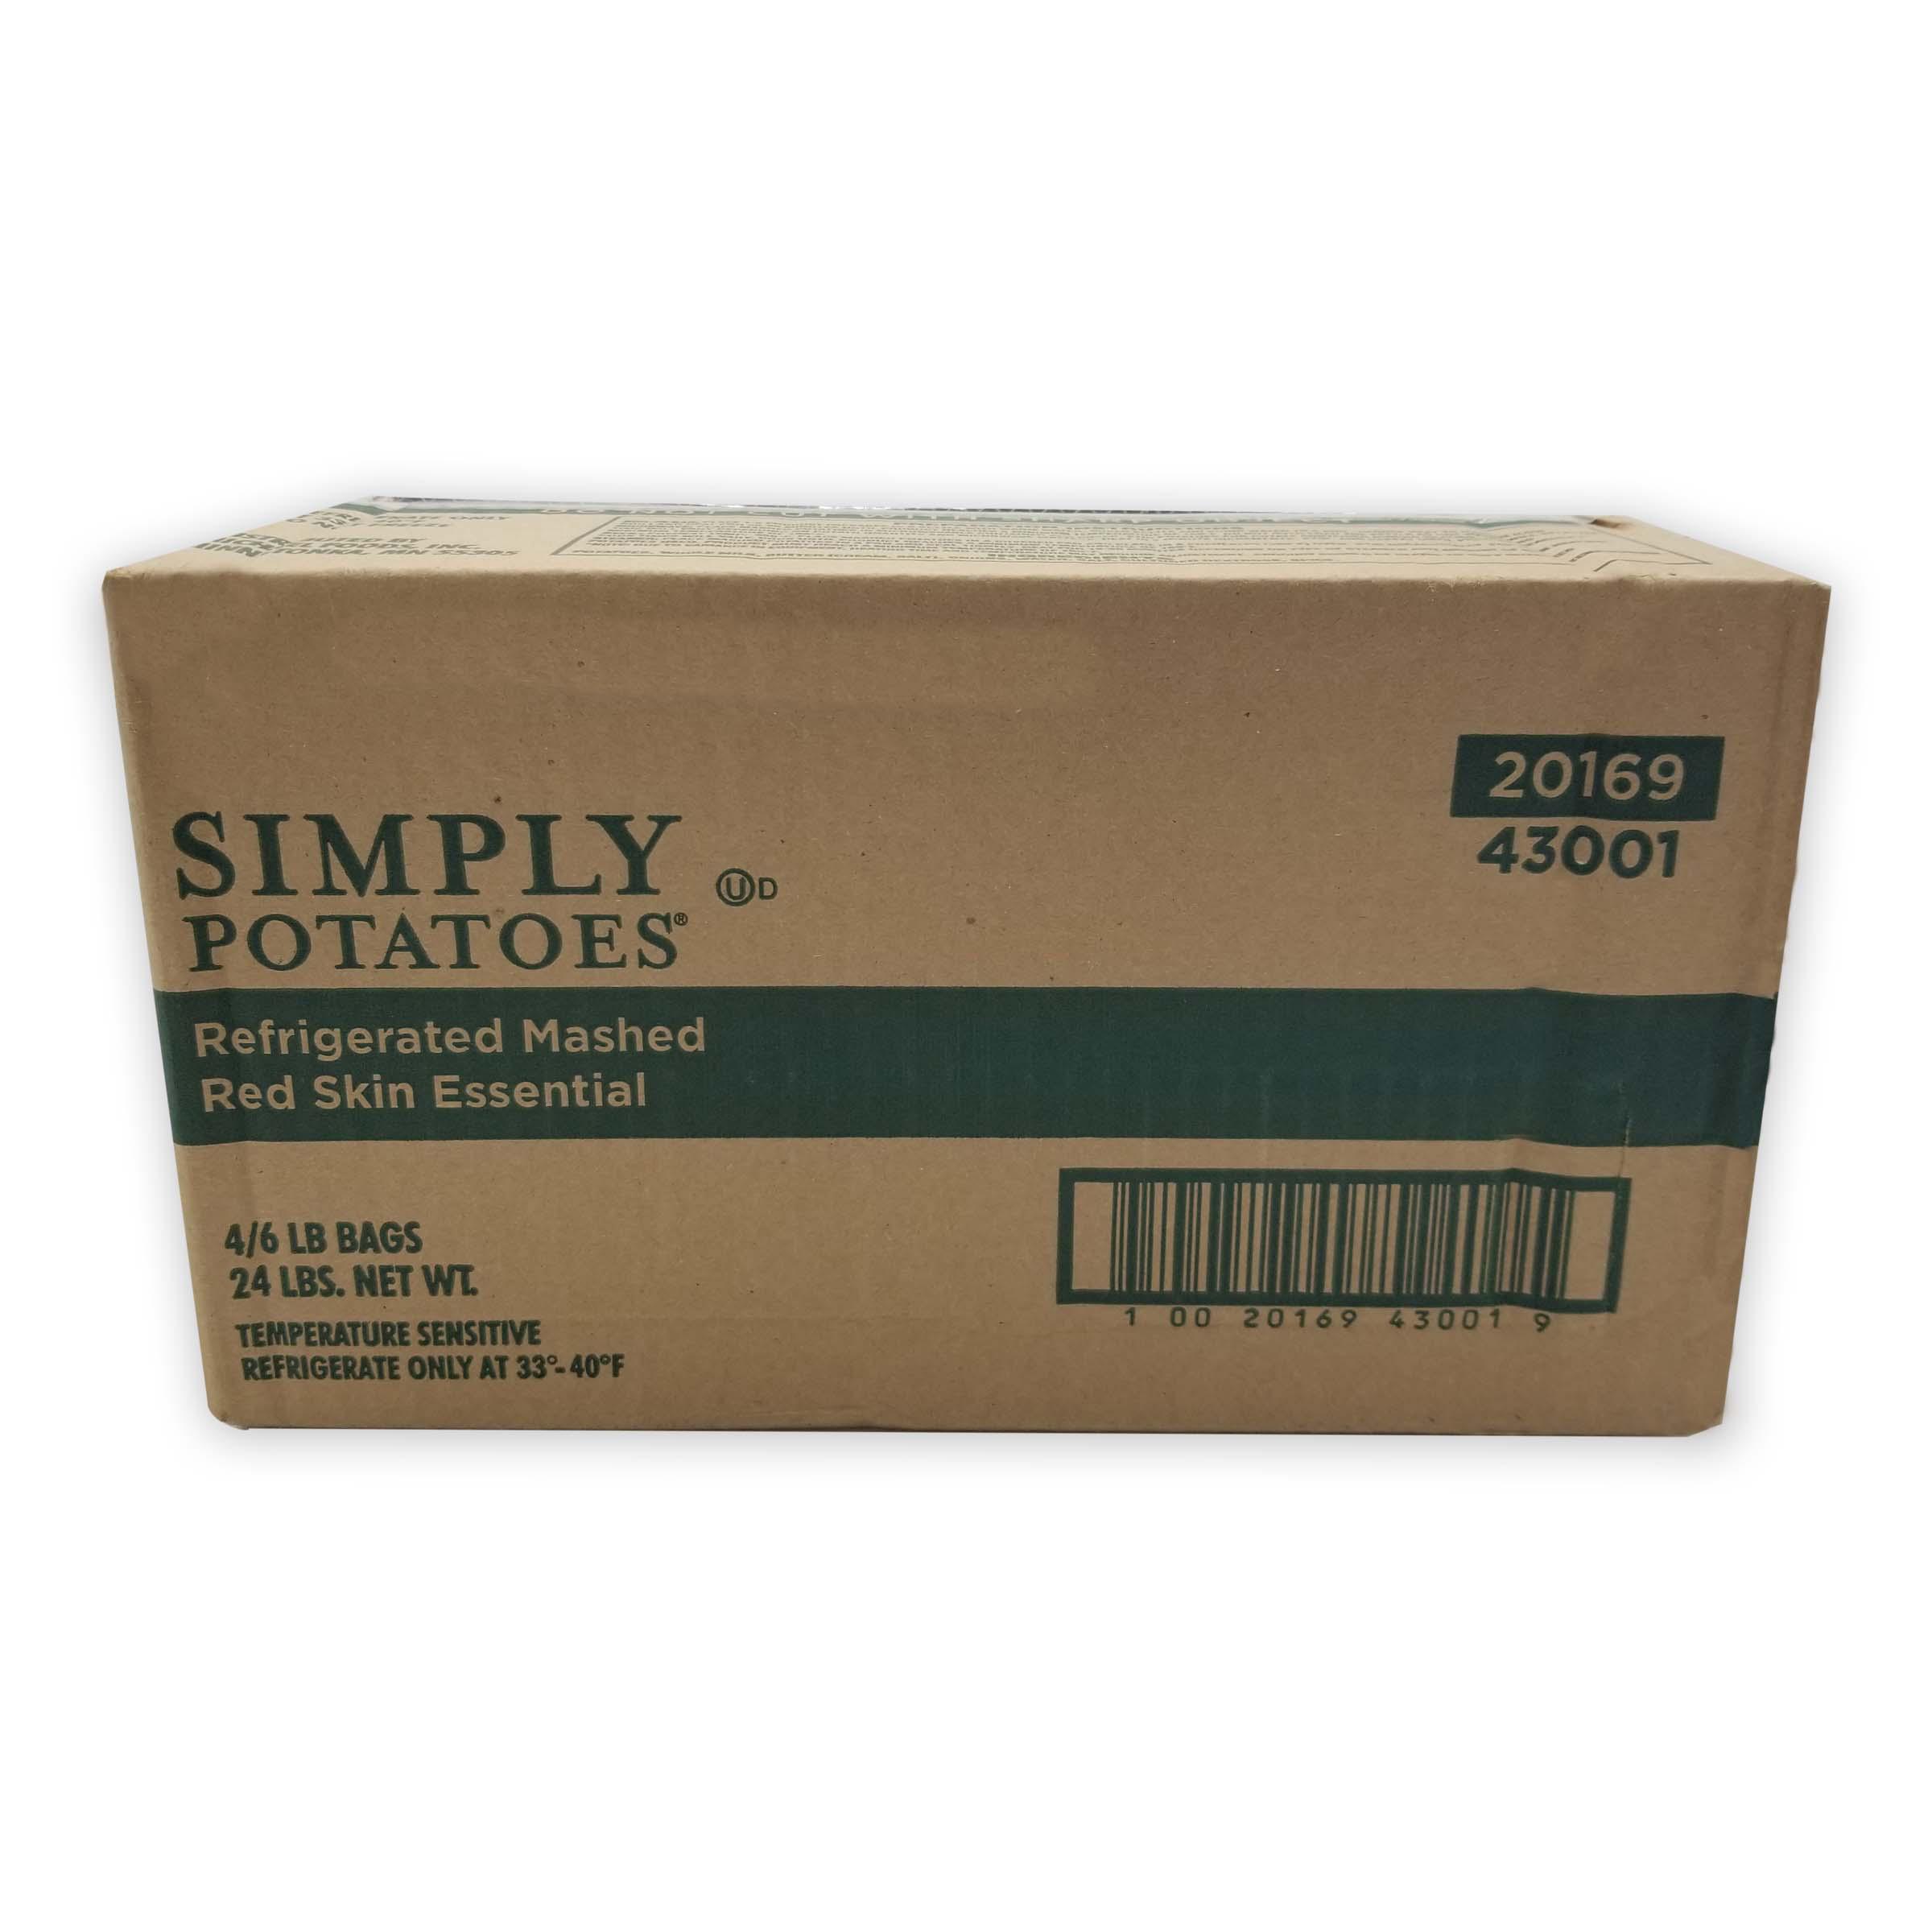 Simply Potatoes® Refrigerated Essential Red Skin Mashed Potatoes made with Red Skin Potatoes, 4/6 lb bags